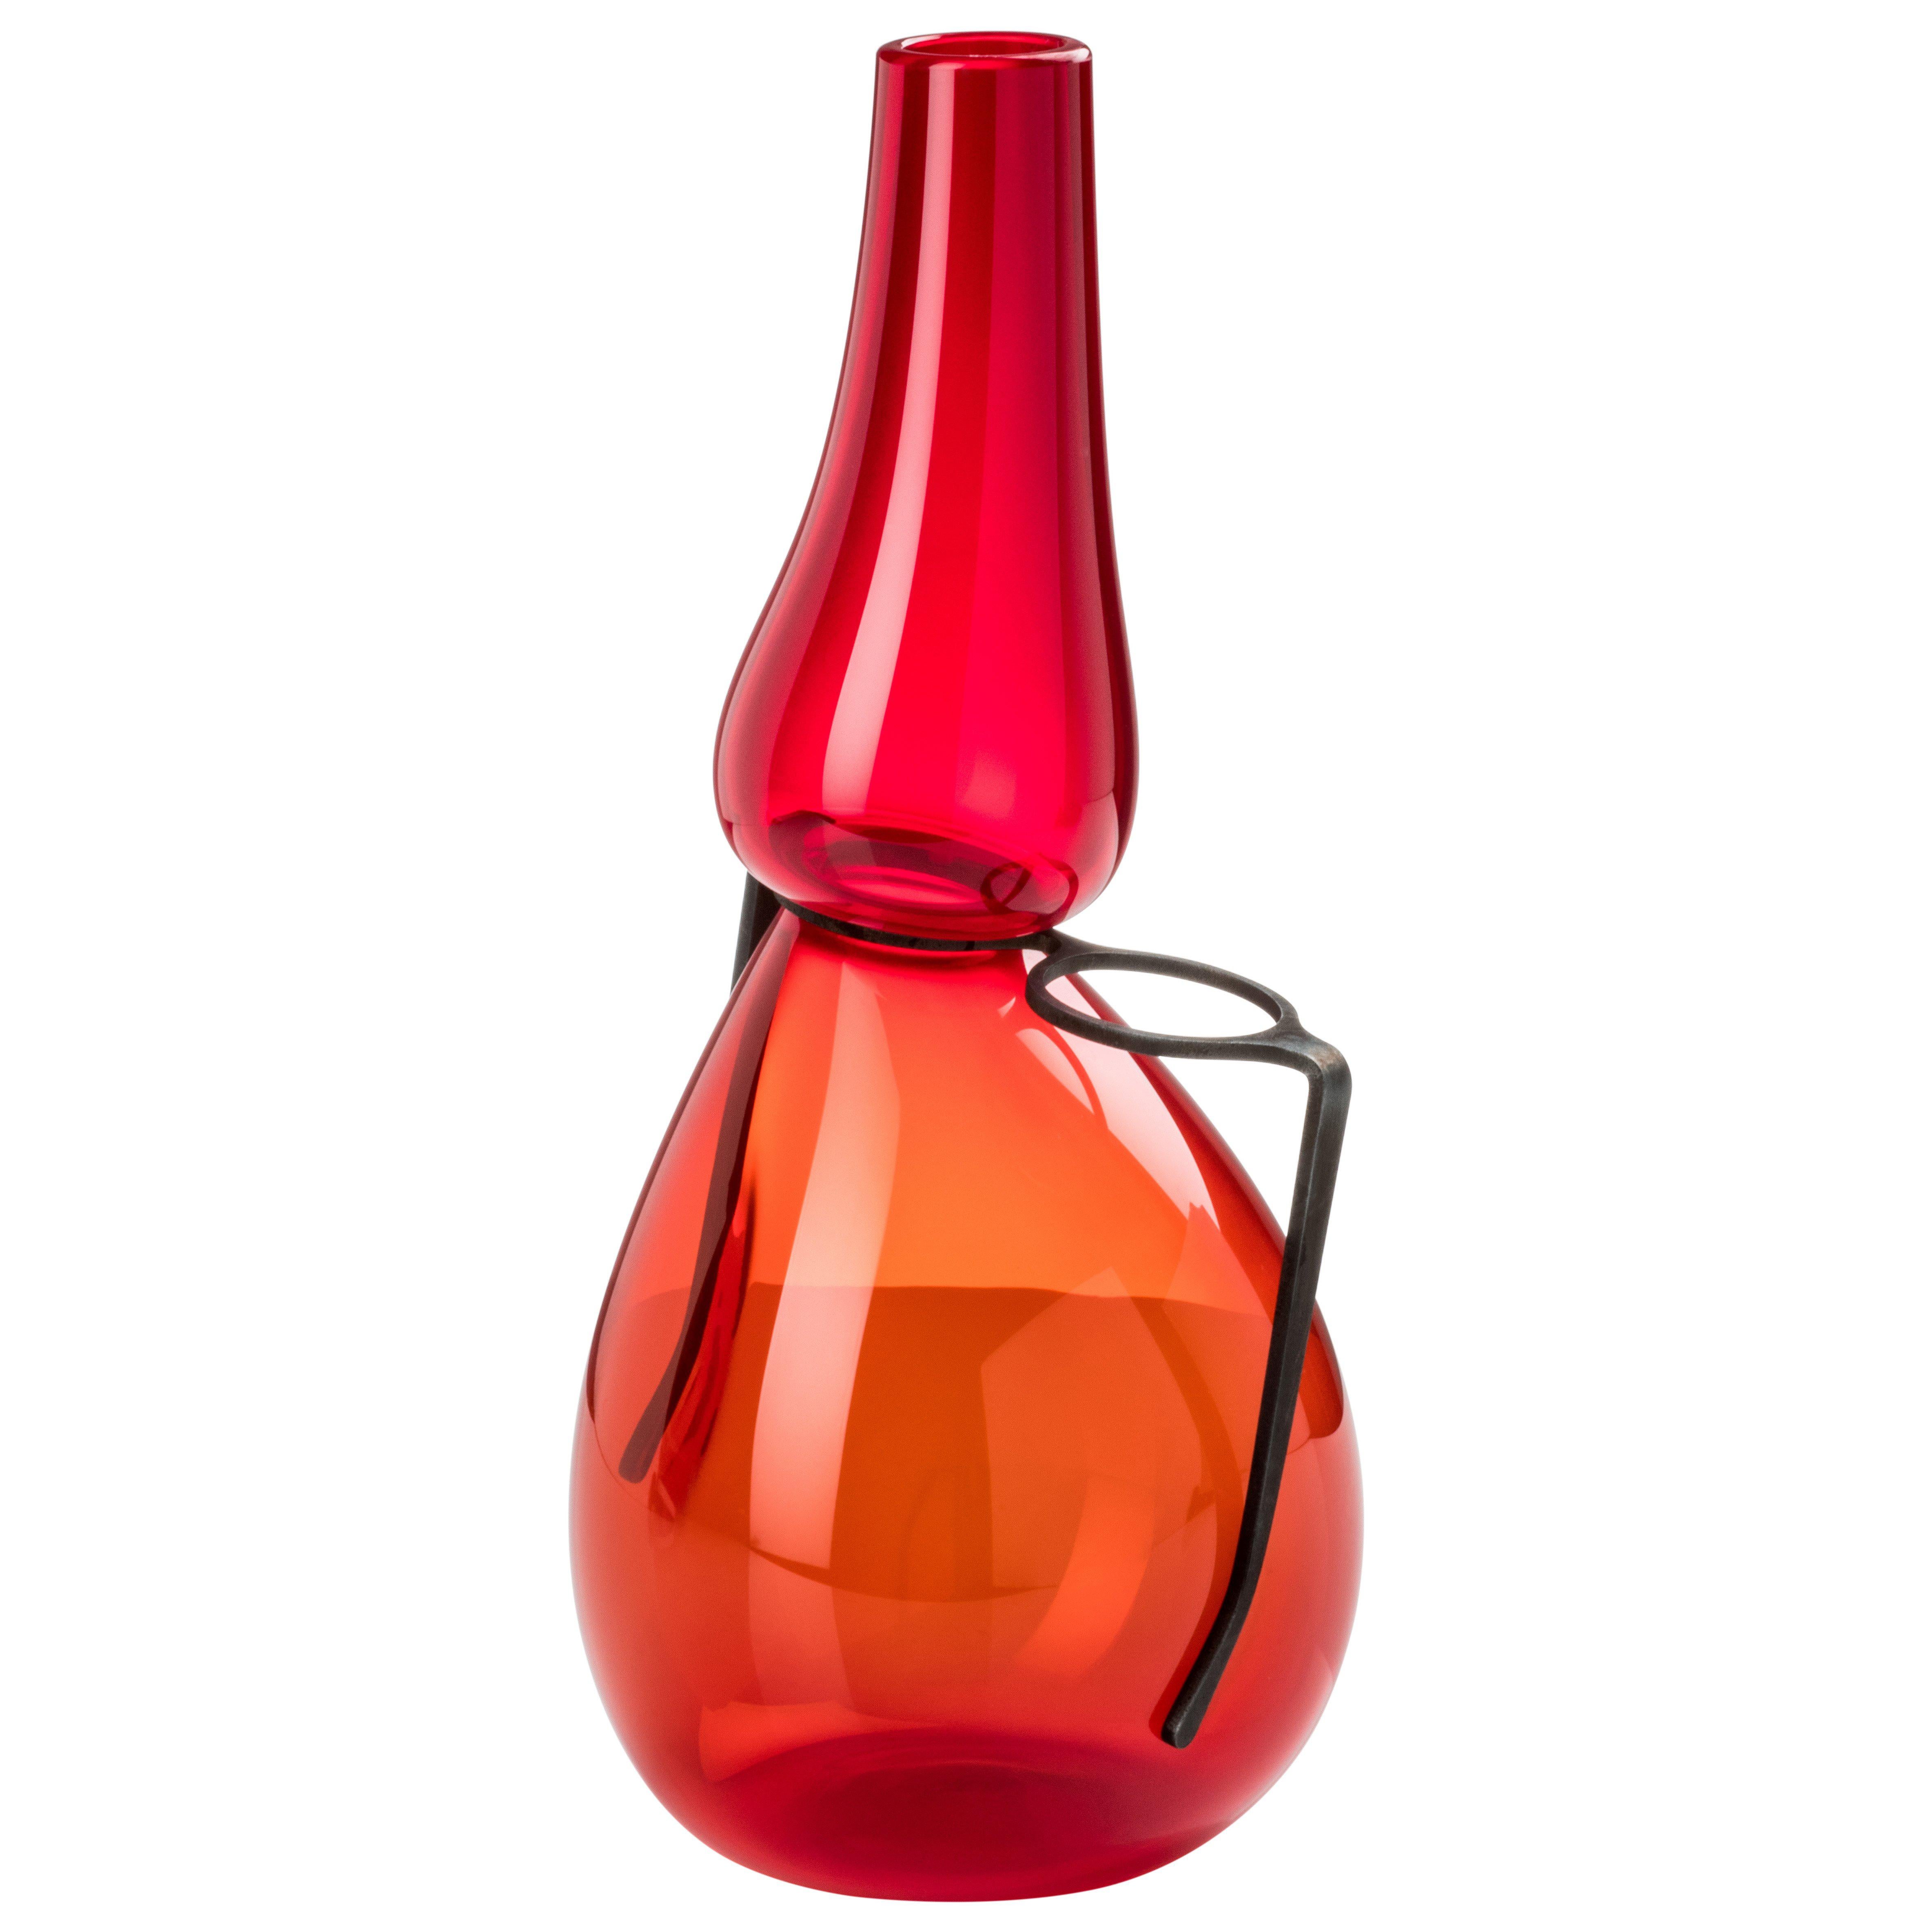 Venini 'Where Are My Glasses?' Single Lens Glass Vase in Red by Ron Arad For Sale